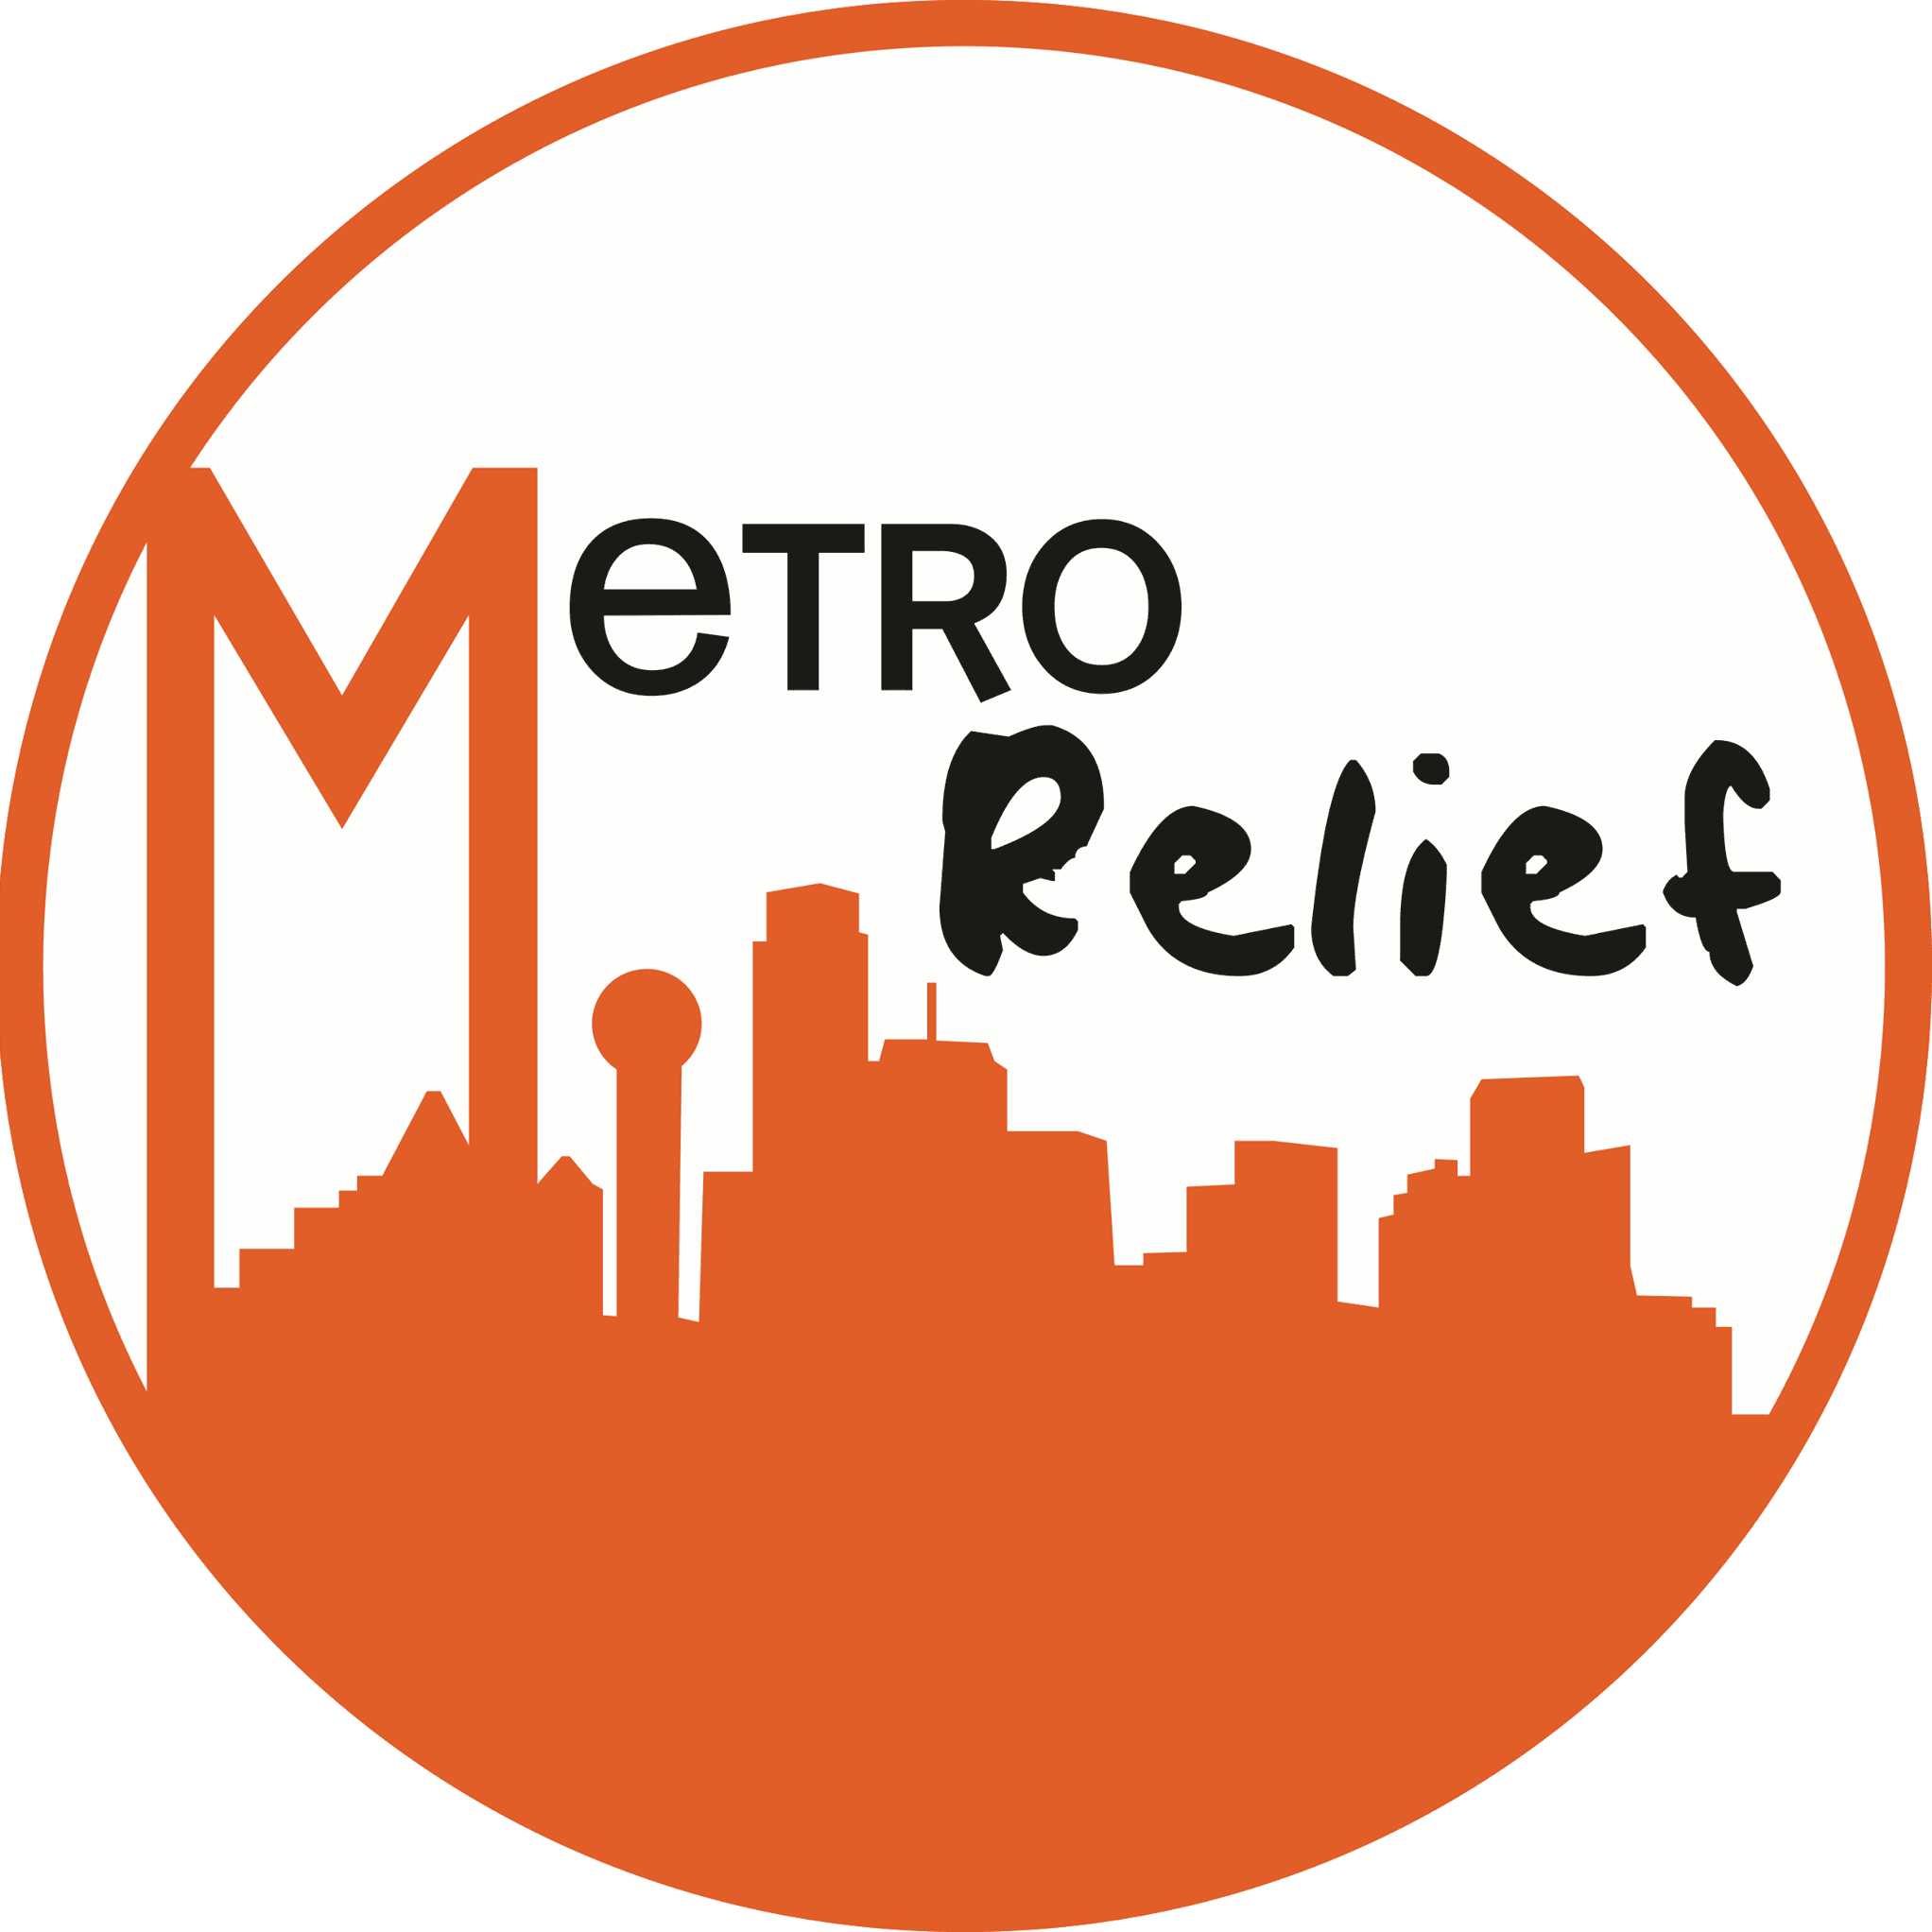 The Storehouse of Metro Relief